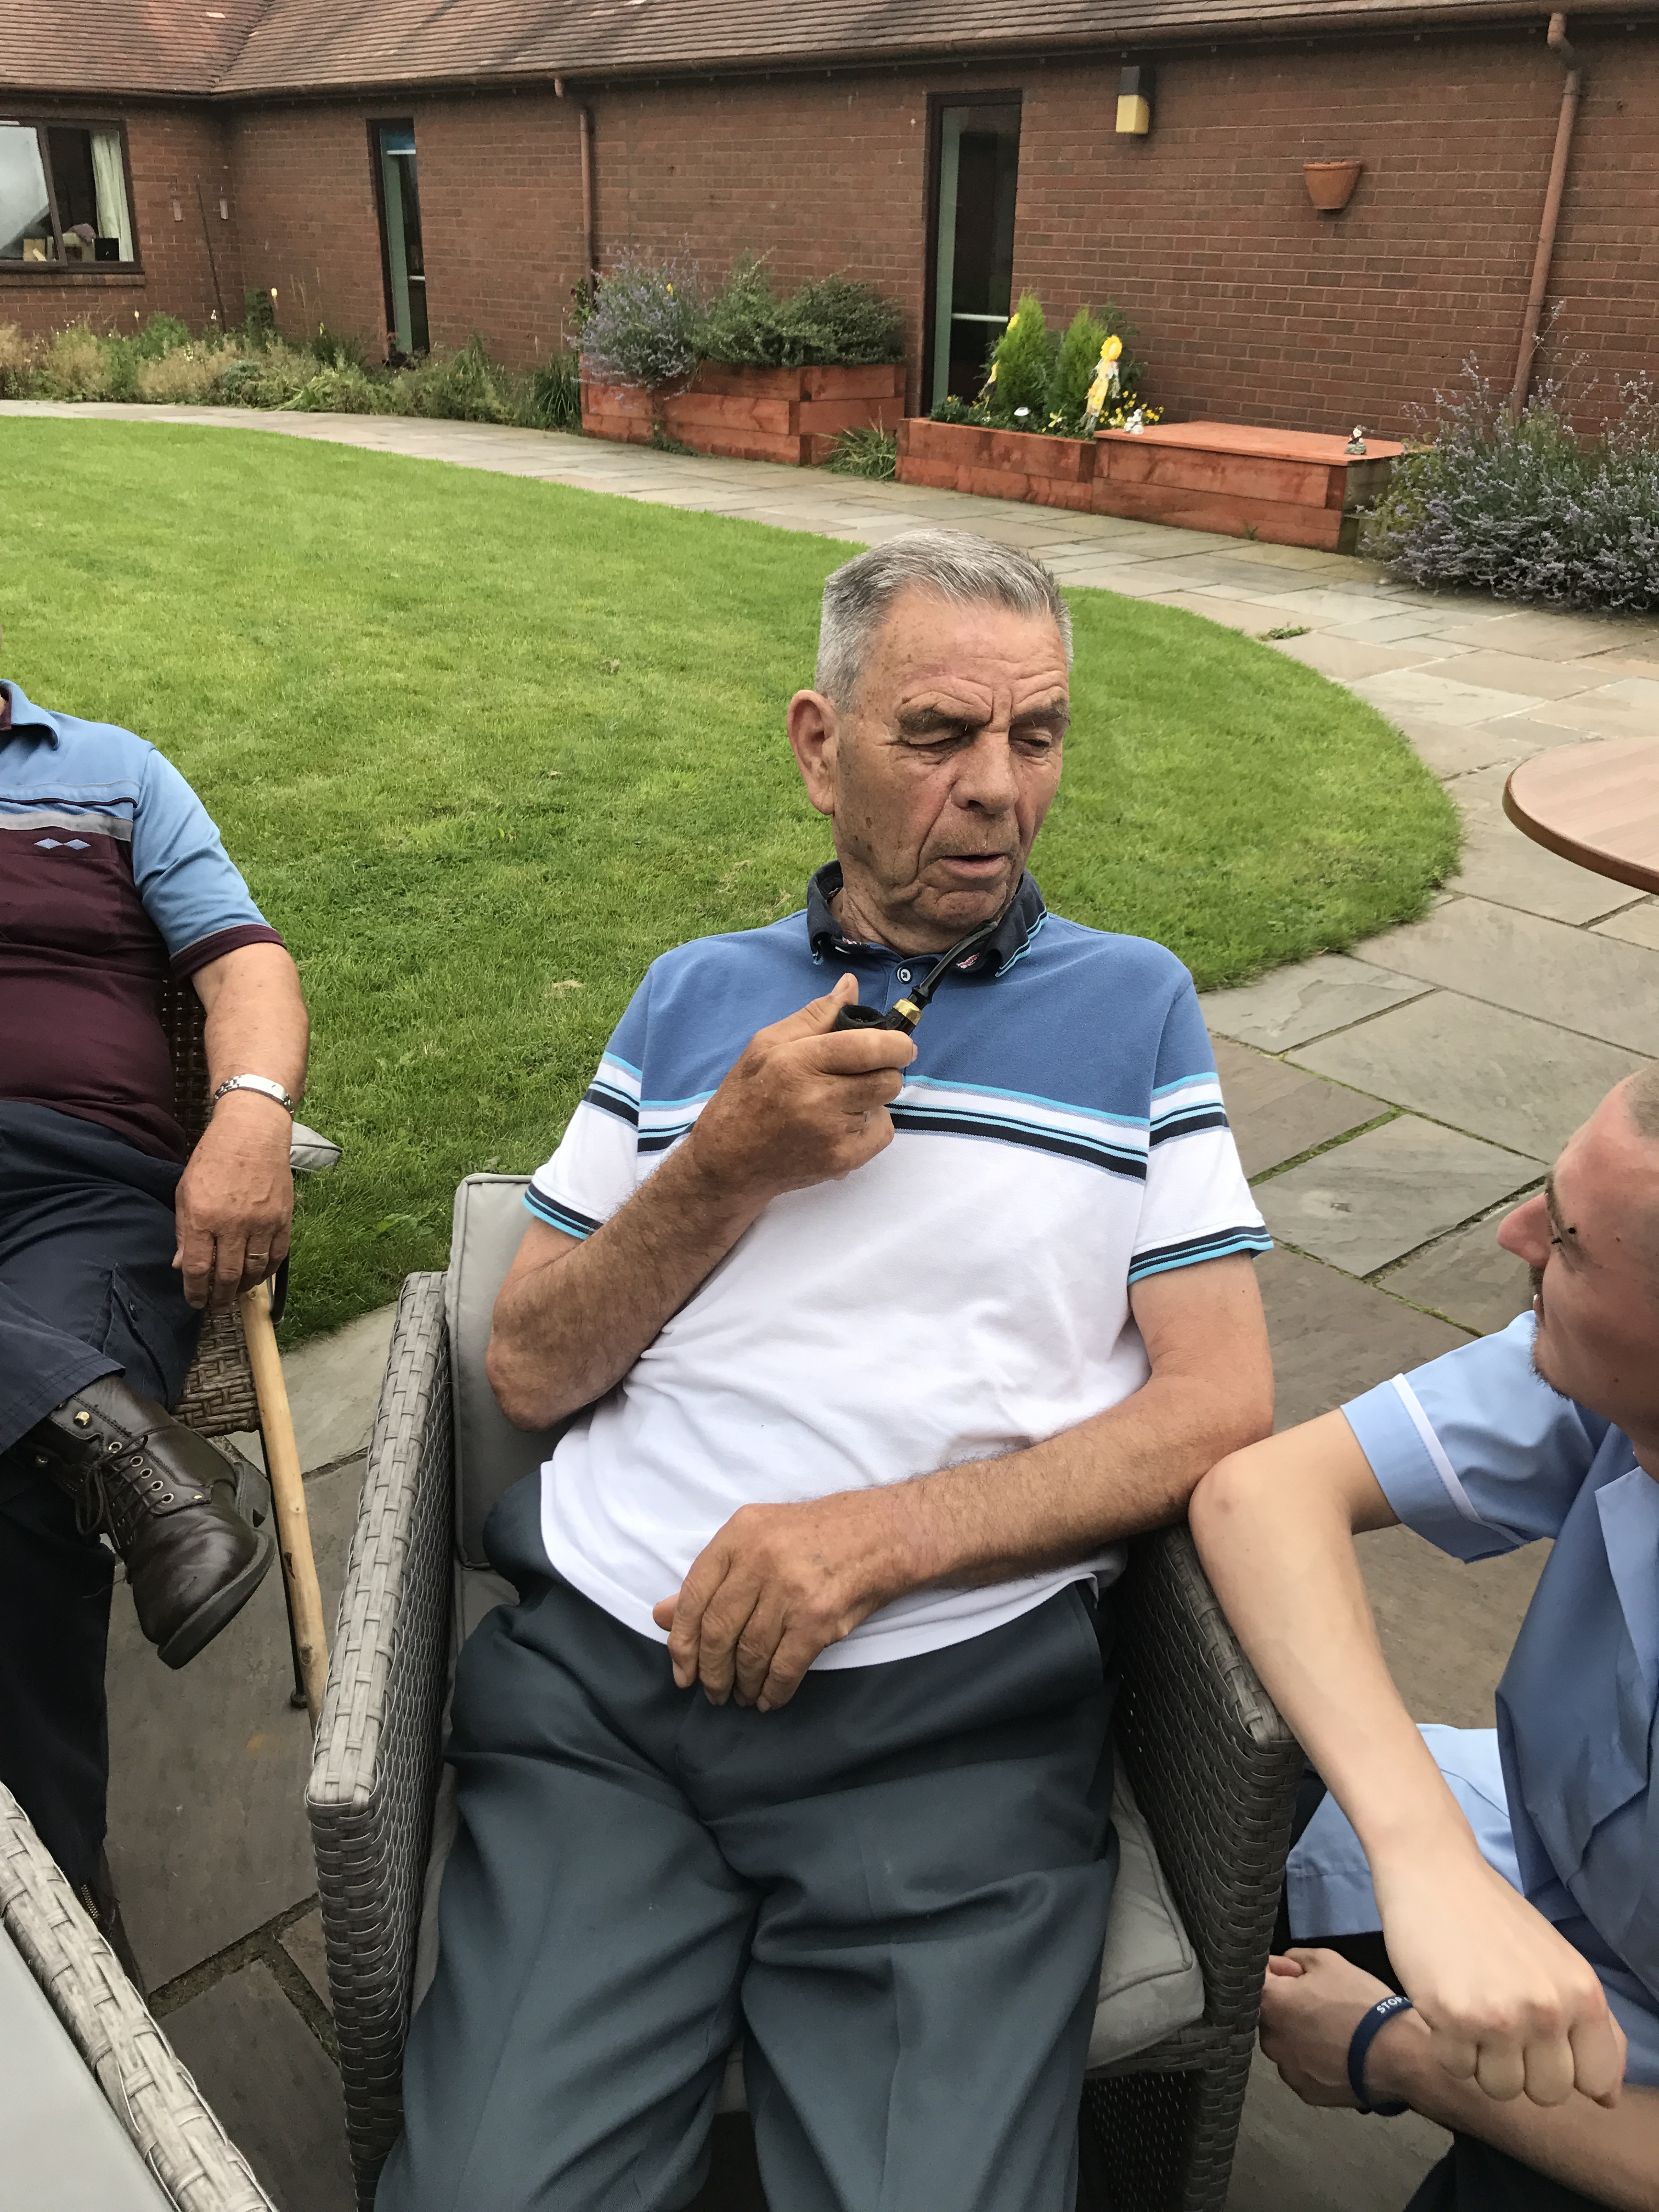 Chilling out in the Grace Court Garden Aug 17: Key Healthcare is dedicated to caring for elderly residents in safe. We have multiple dementia care homes including our care home middlesbrough, our care home St. Helen and care home saltburn. We excel in monitoring and improving care levels.